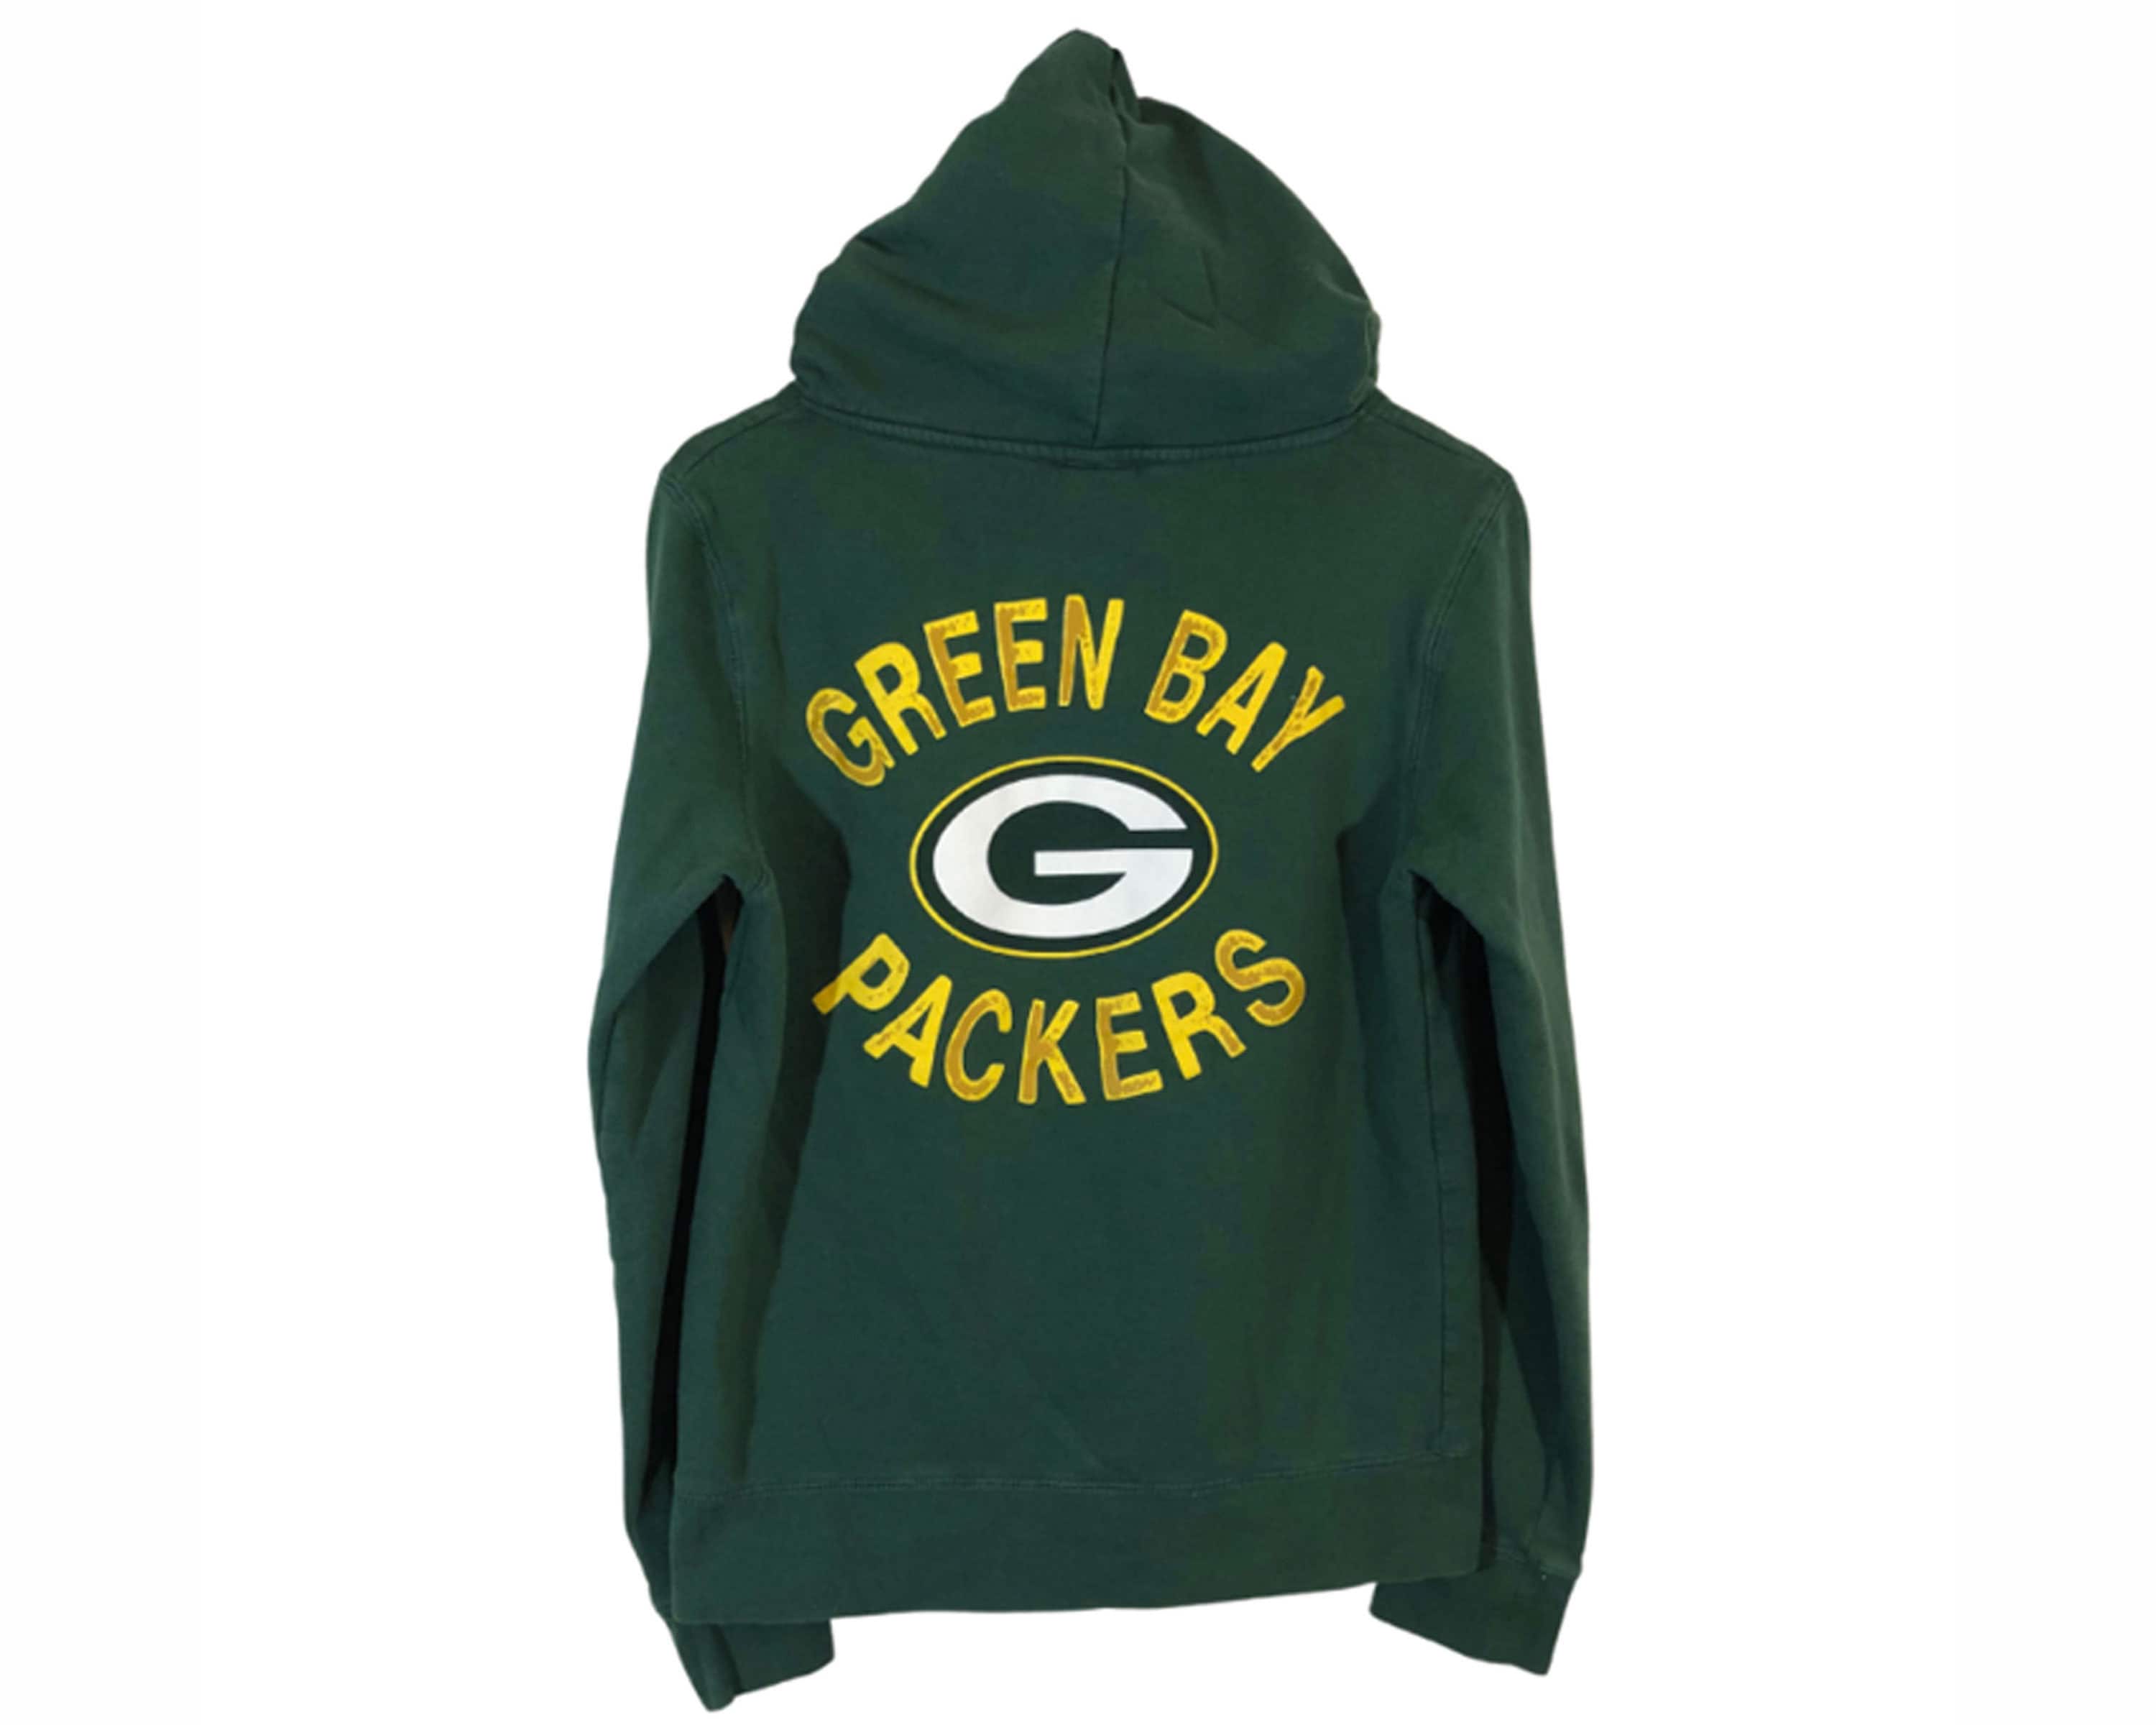 N.F.L Professional Sport Football GREEN BAY PACKERS Gray Embroidered Hoodie Size M National Football League